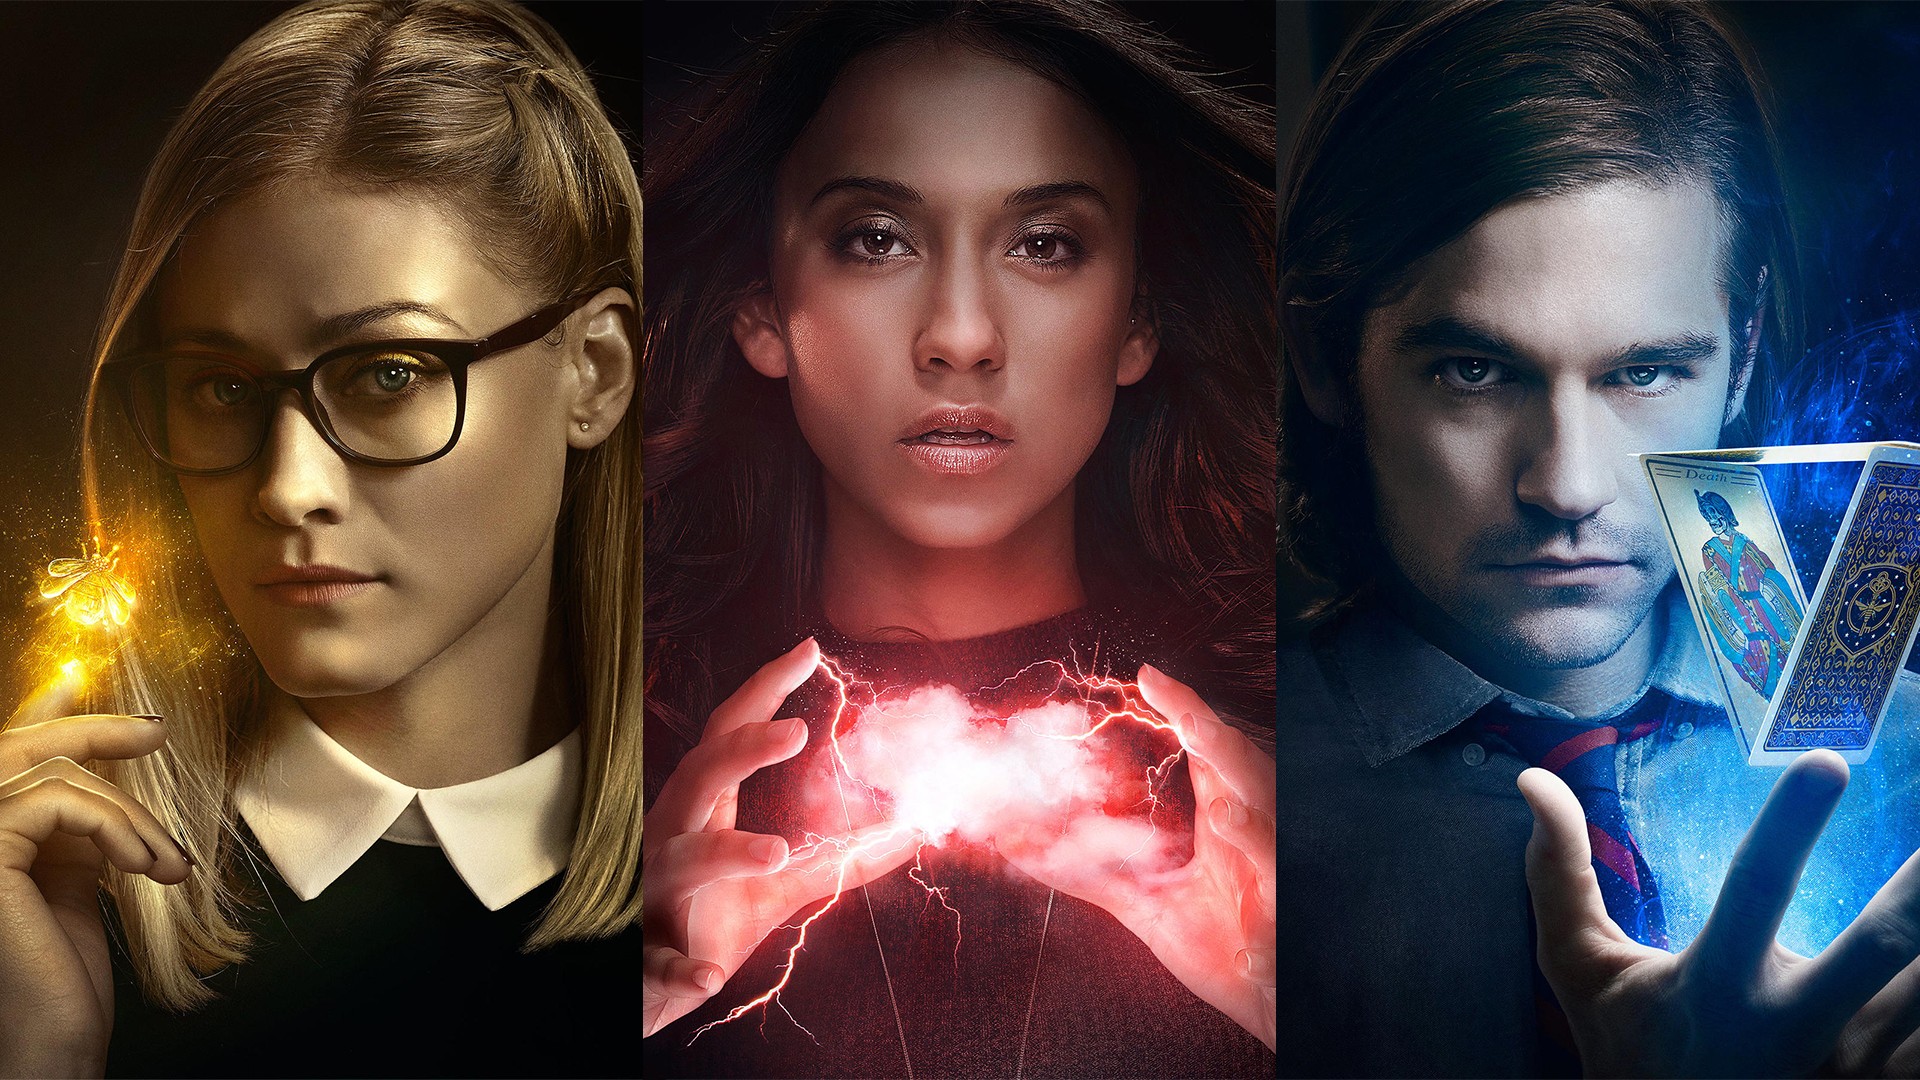 The Magicians Collage Women With Glasses Men Magic Olivia Taylor Dudley Stella Maeve 1920x1080